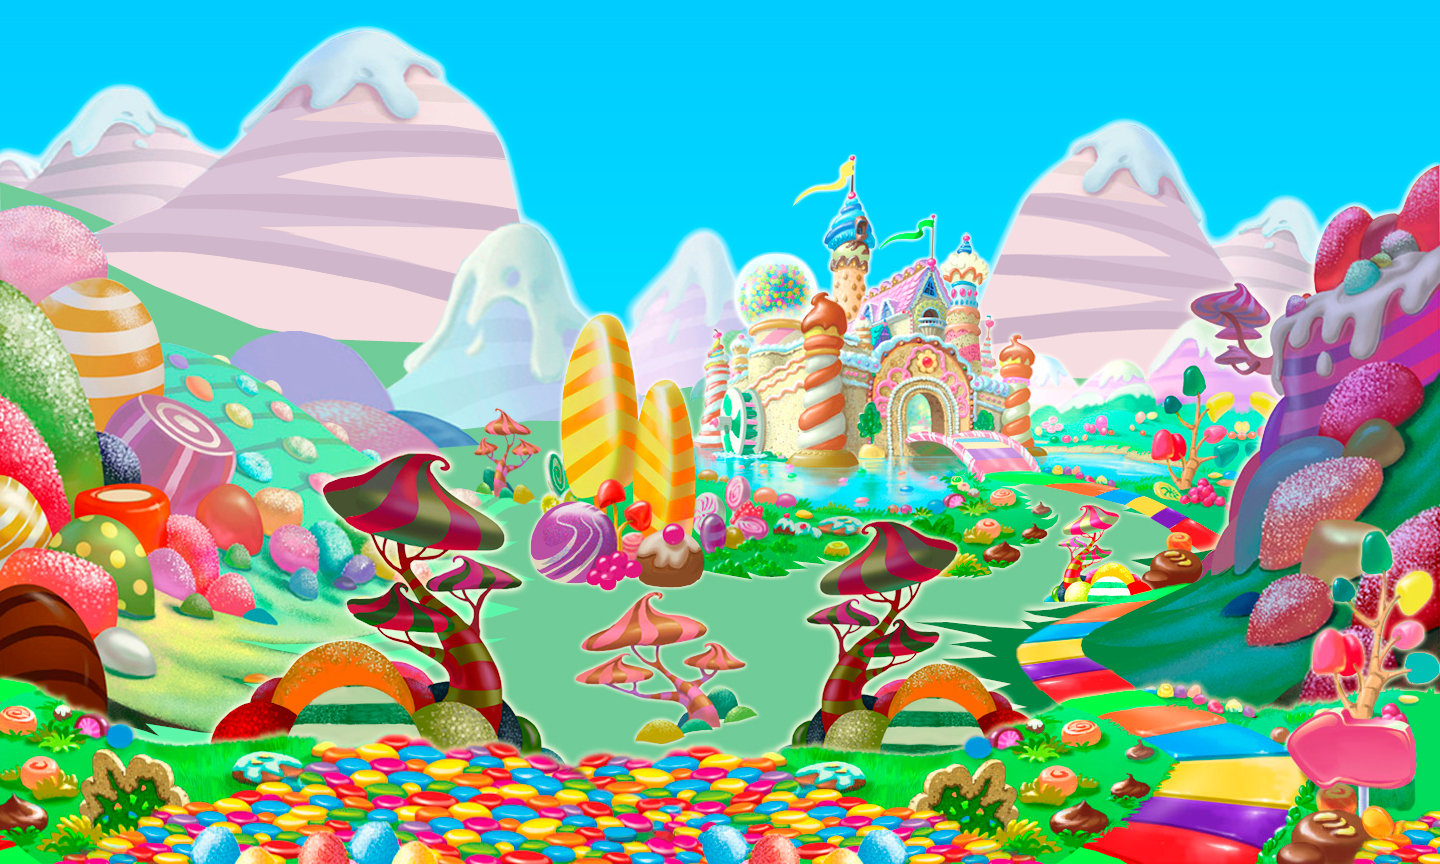 Welcome to Candyland!